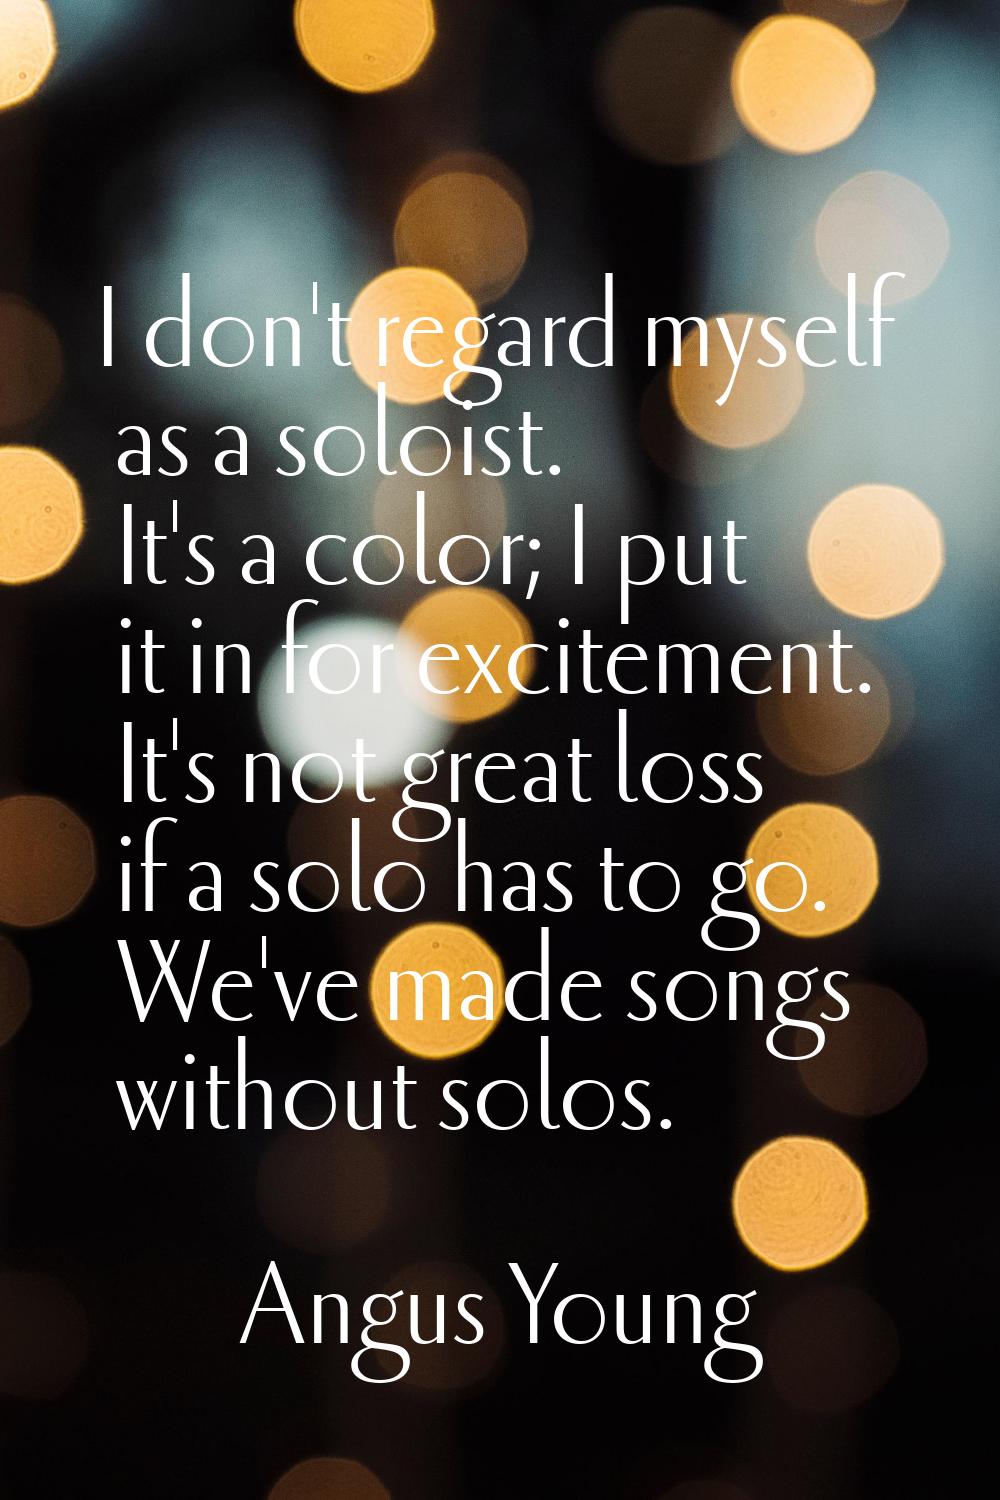 I don't regard myself as a soloist. It's a color; I put it in for excitement. It's not great loss i